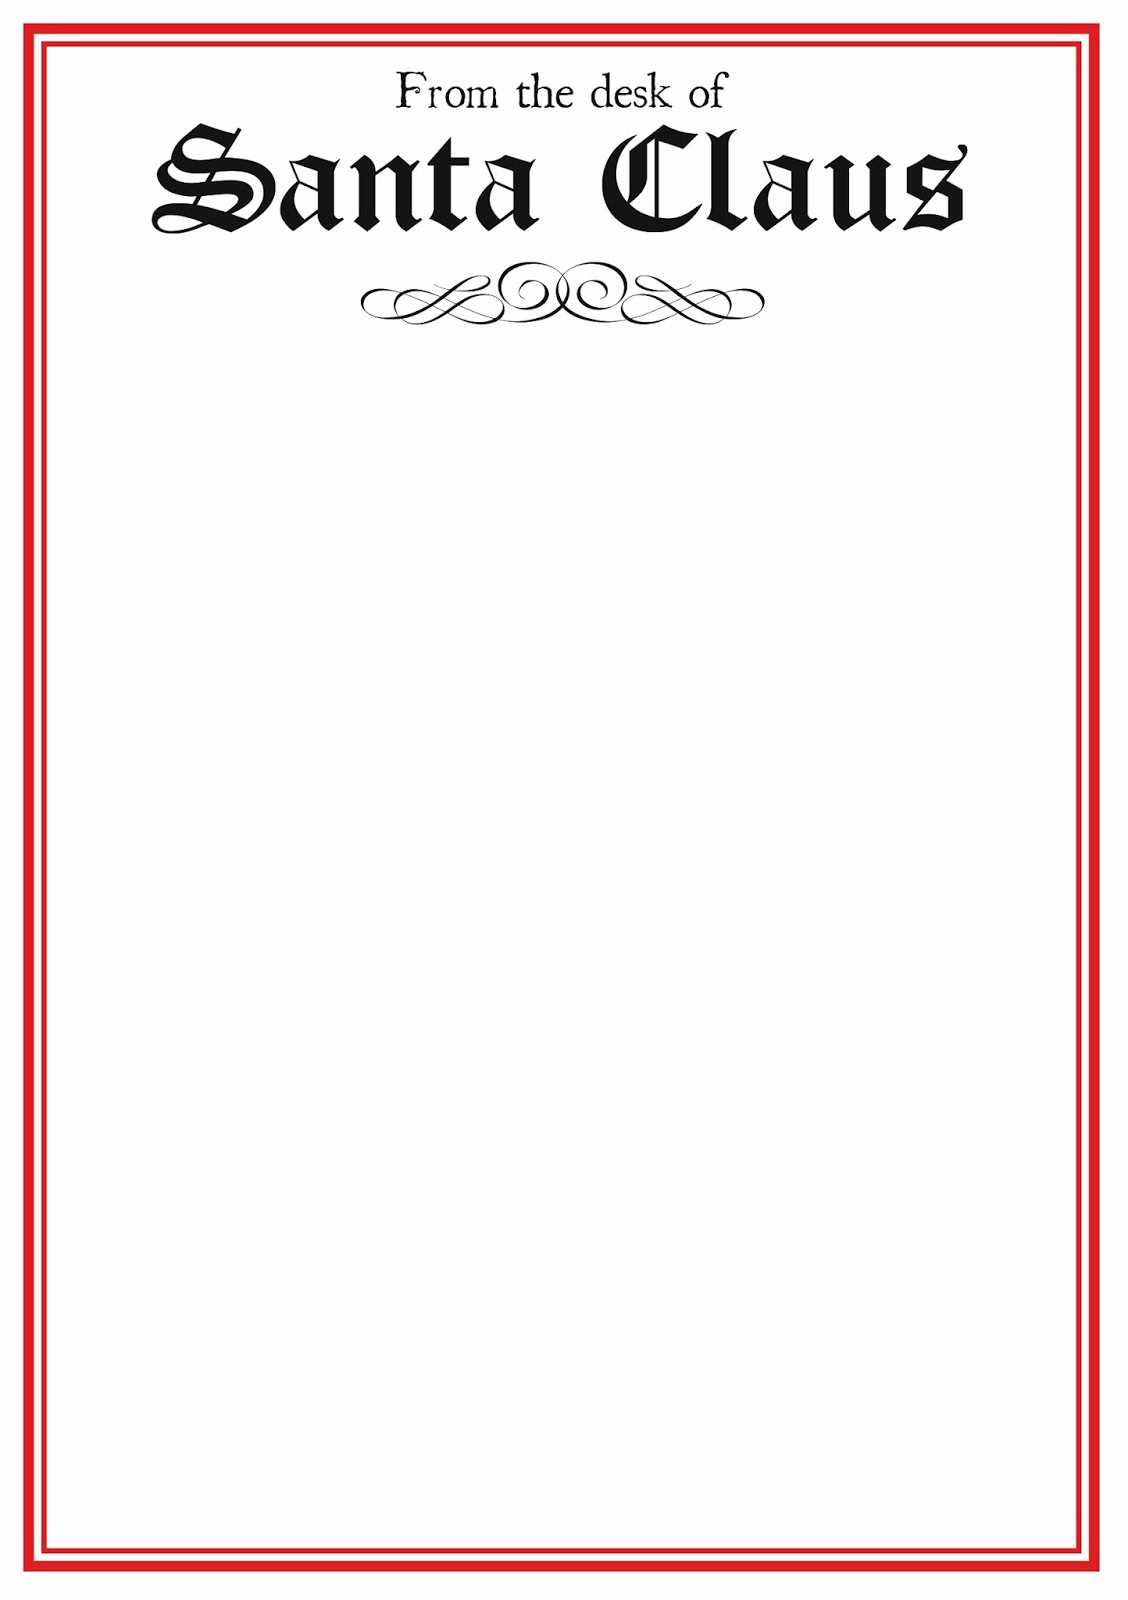 Letter To Santa Template Word - Dalep.midnightpig.co With Regard To Santa Letter Template Word